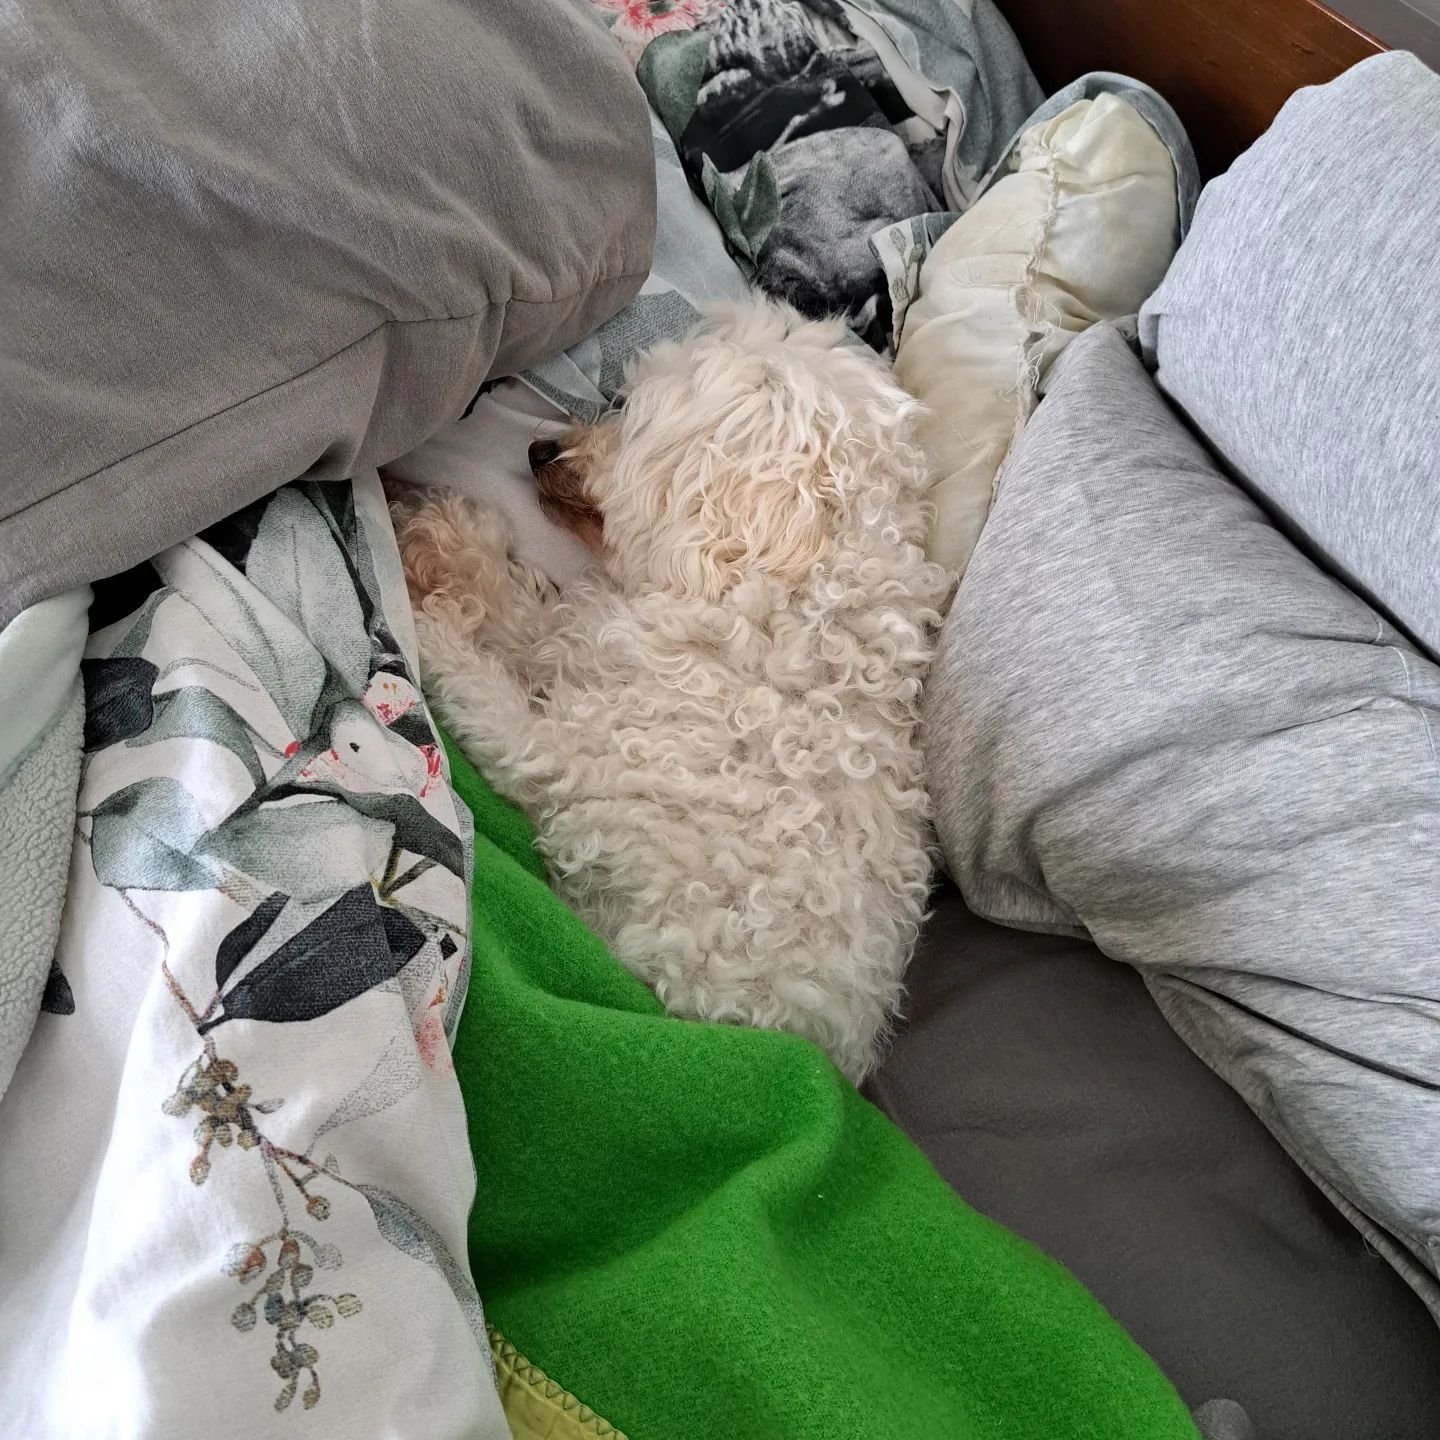 Daisy's decided that staying in bed on this freezing cold day is the best option.
Can't say I blame her

#sleepydogs 
#mydogiscutest 
#mydogslife